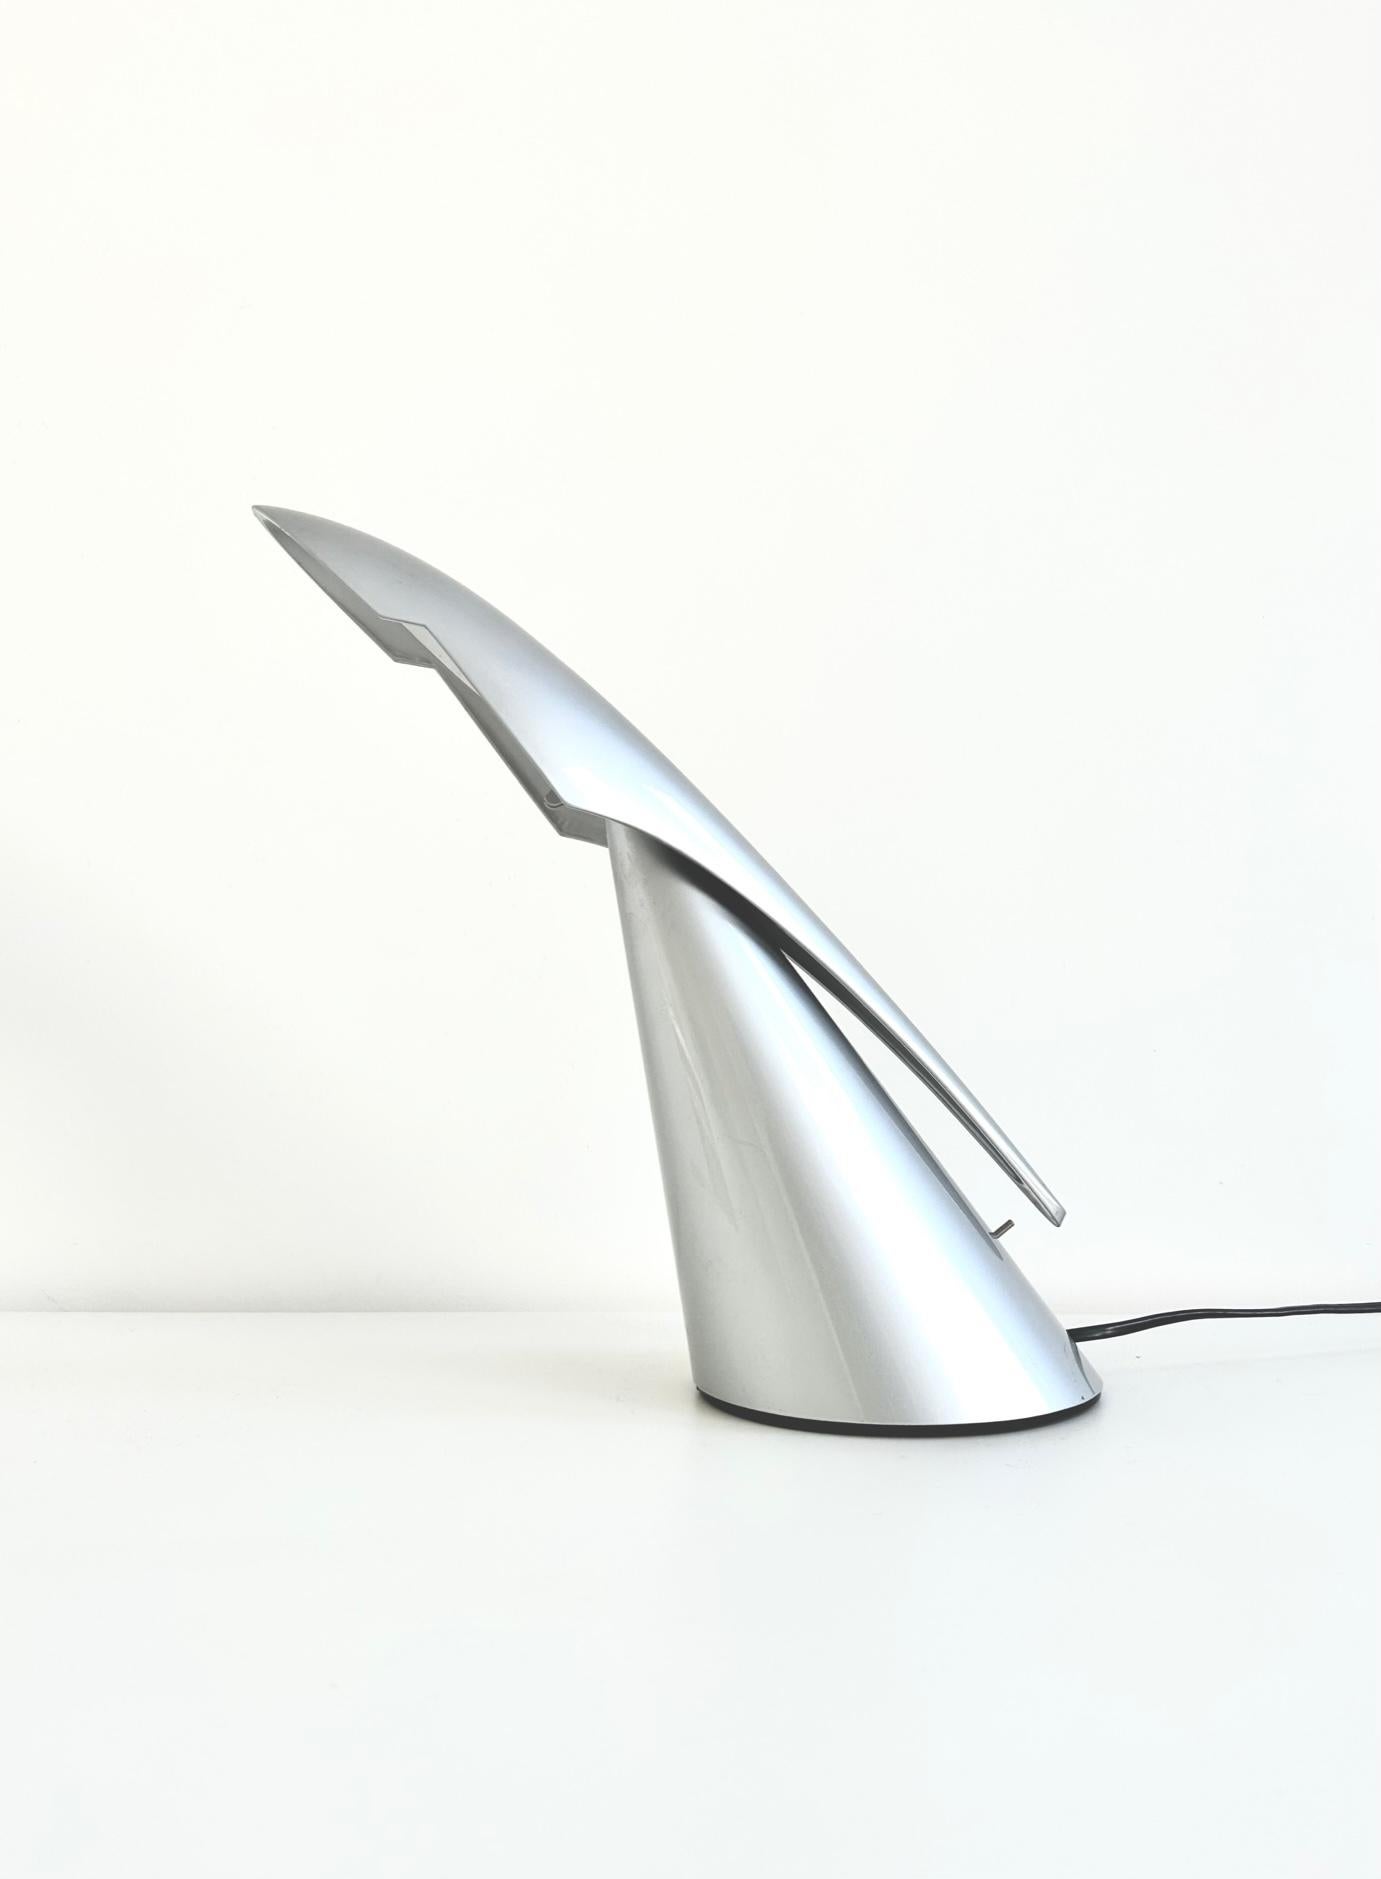 Pair of Ran Desk Lamps, Peter Naumann, ClassiCon, 1990s For Sale 1